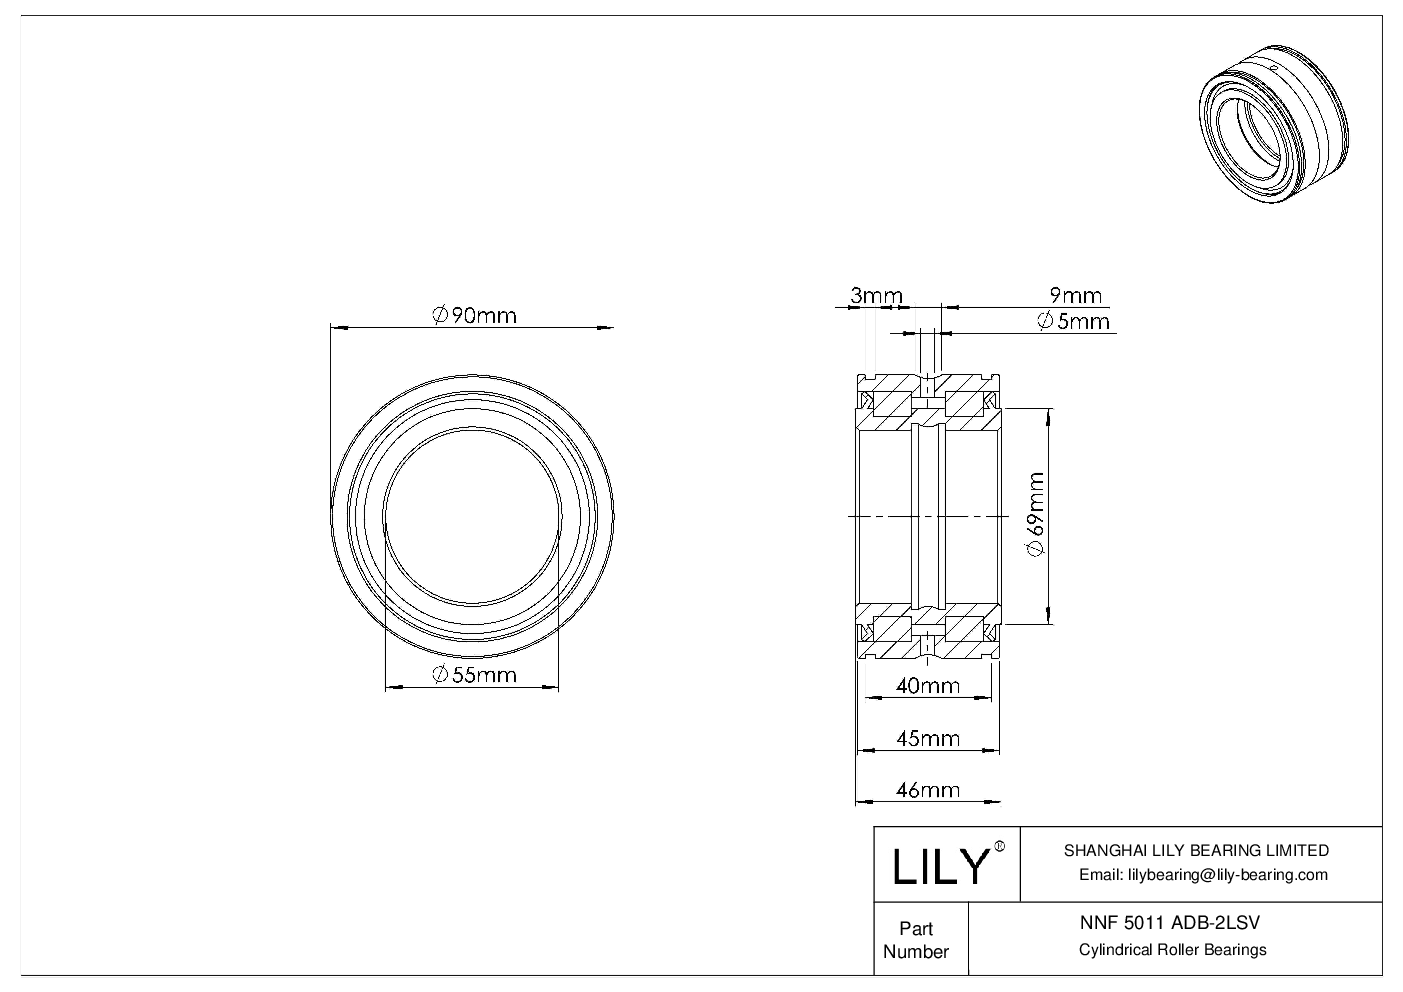 NNF 5011 ADB-2LSV Double Row Full Complement Cylindrical Roller Bearings cad drawing